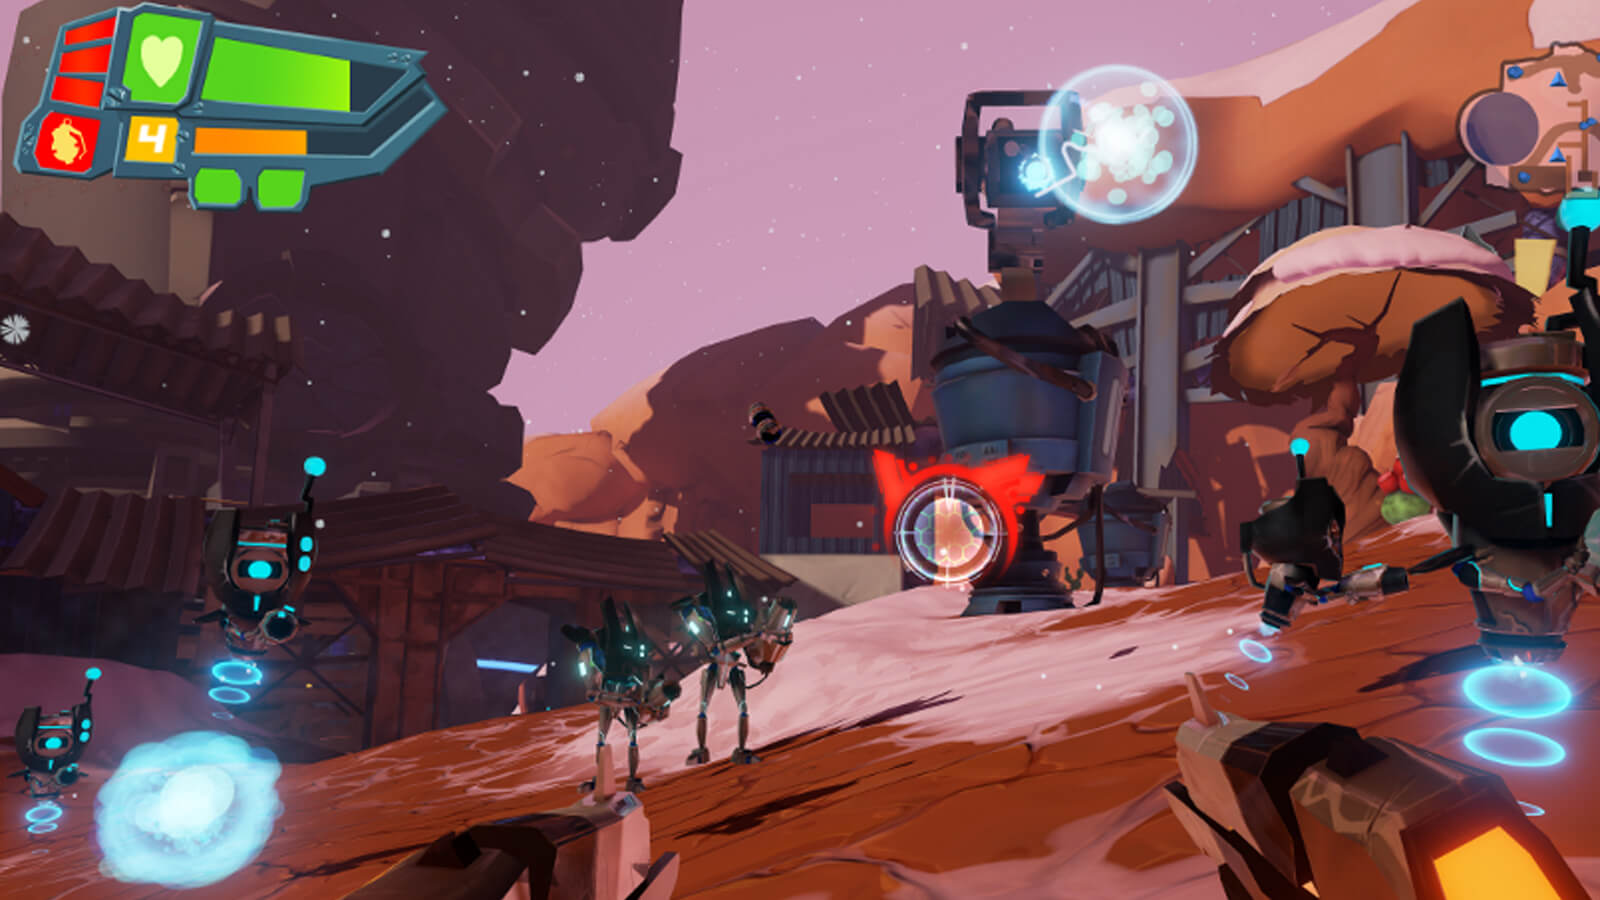 Robots surround the dual-wielding player in a rickety, futuristic landscape.